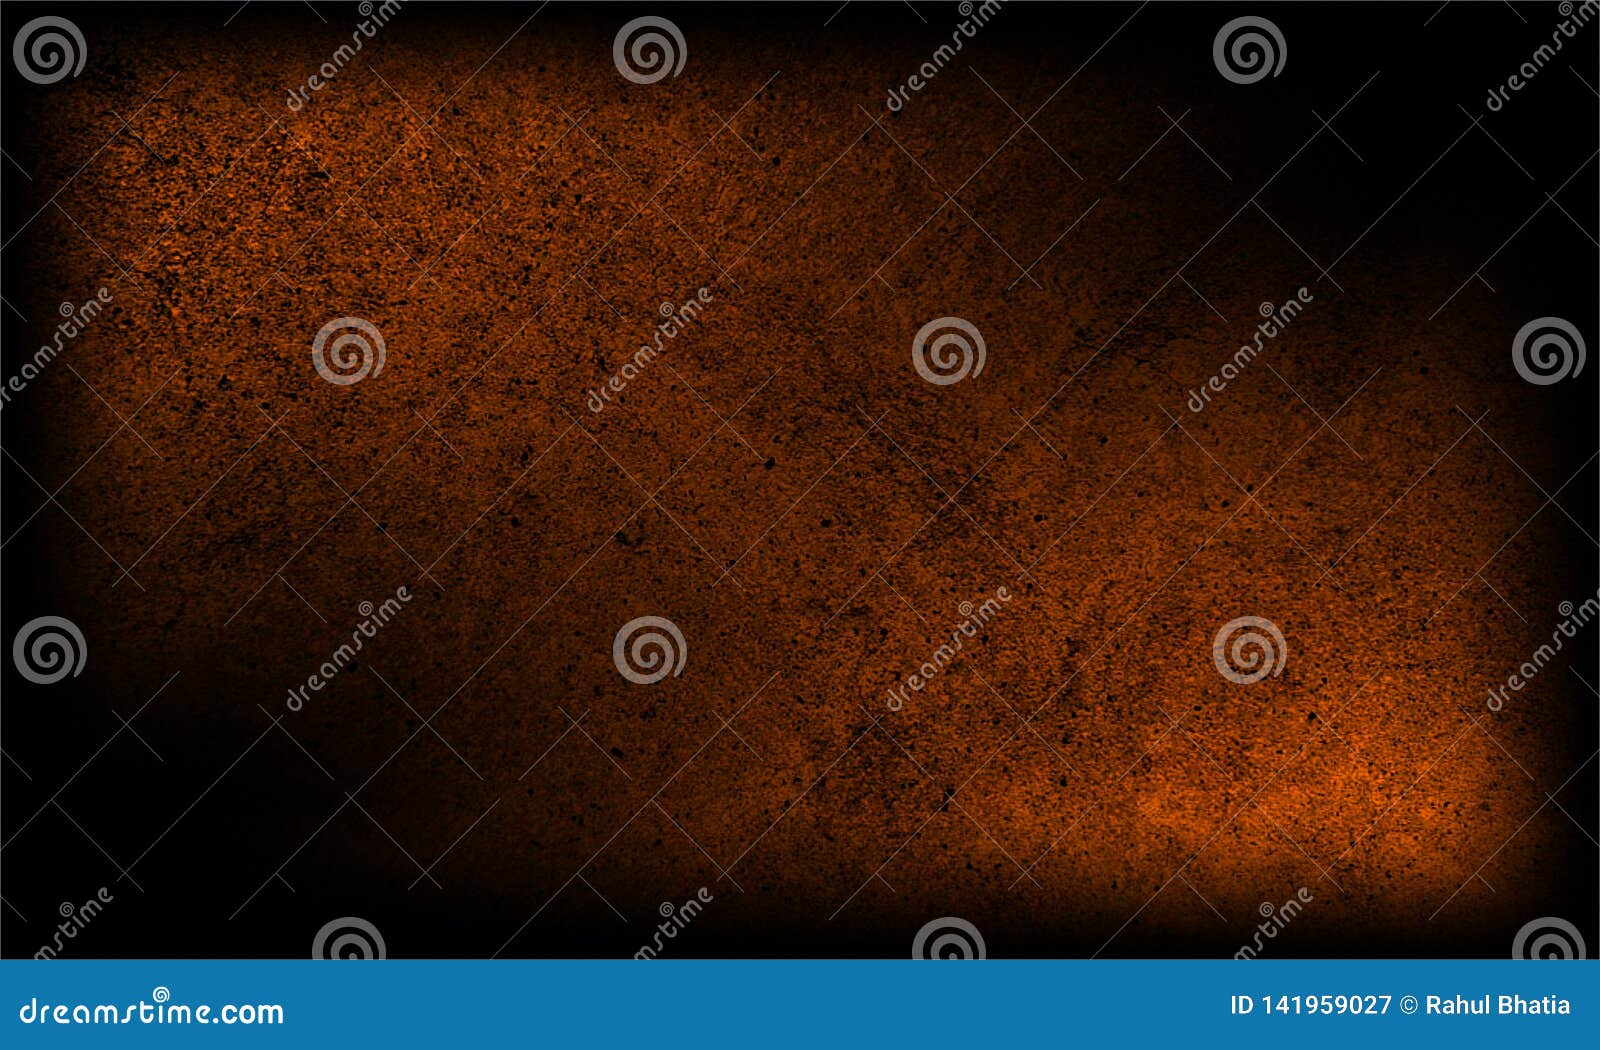 Abstract Black and Brown Texture Background. Stock Illustration